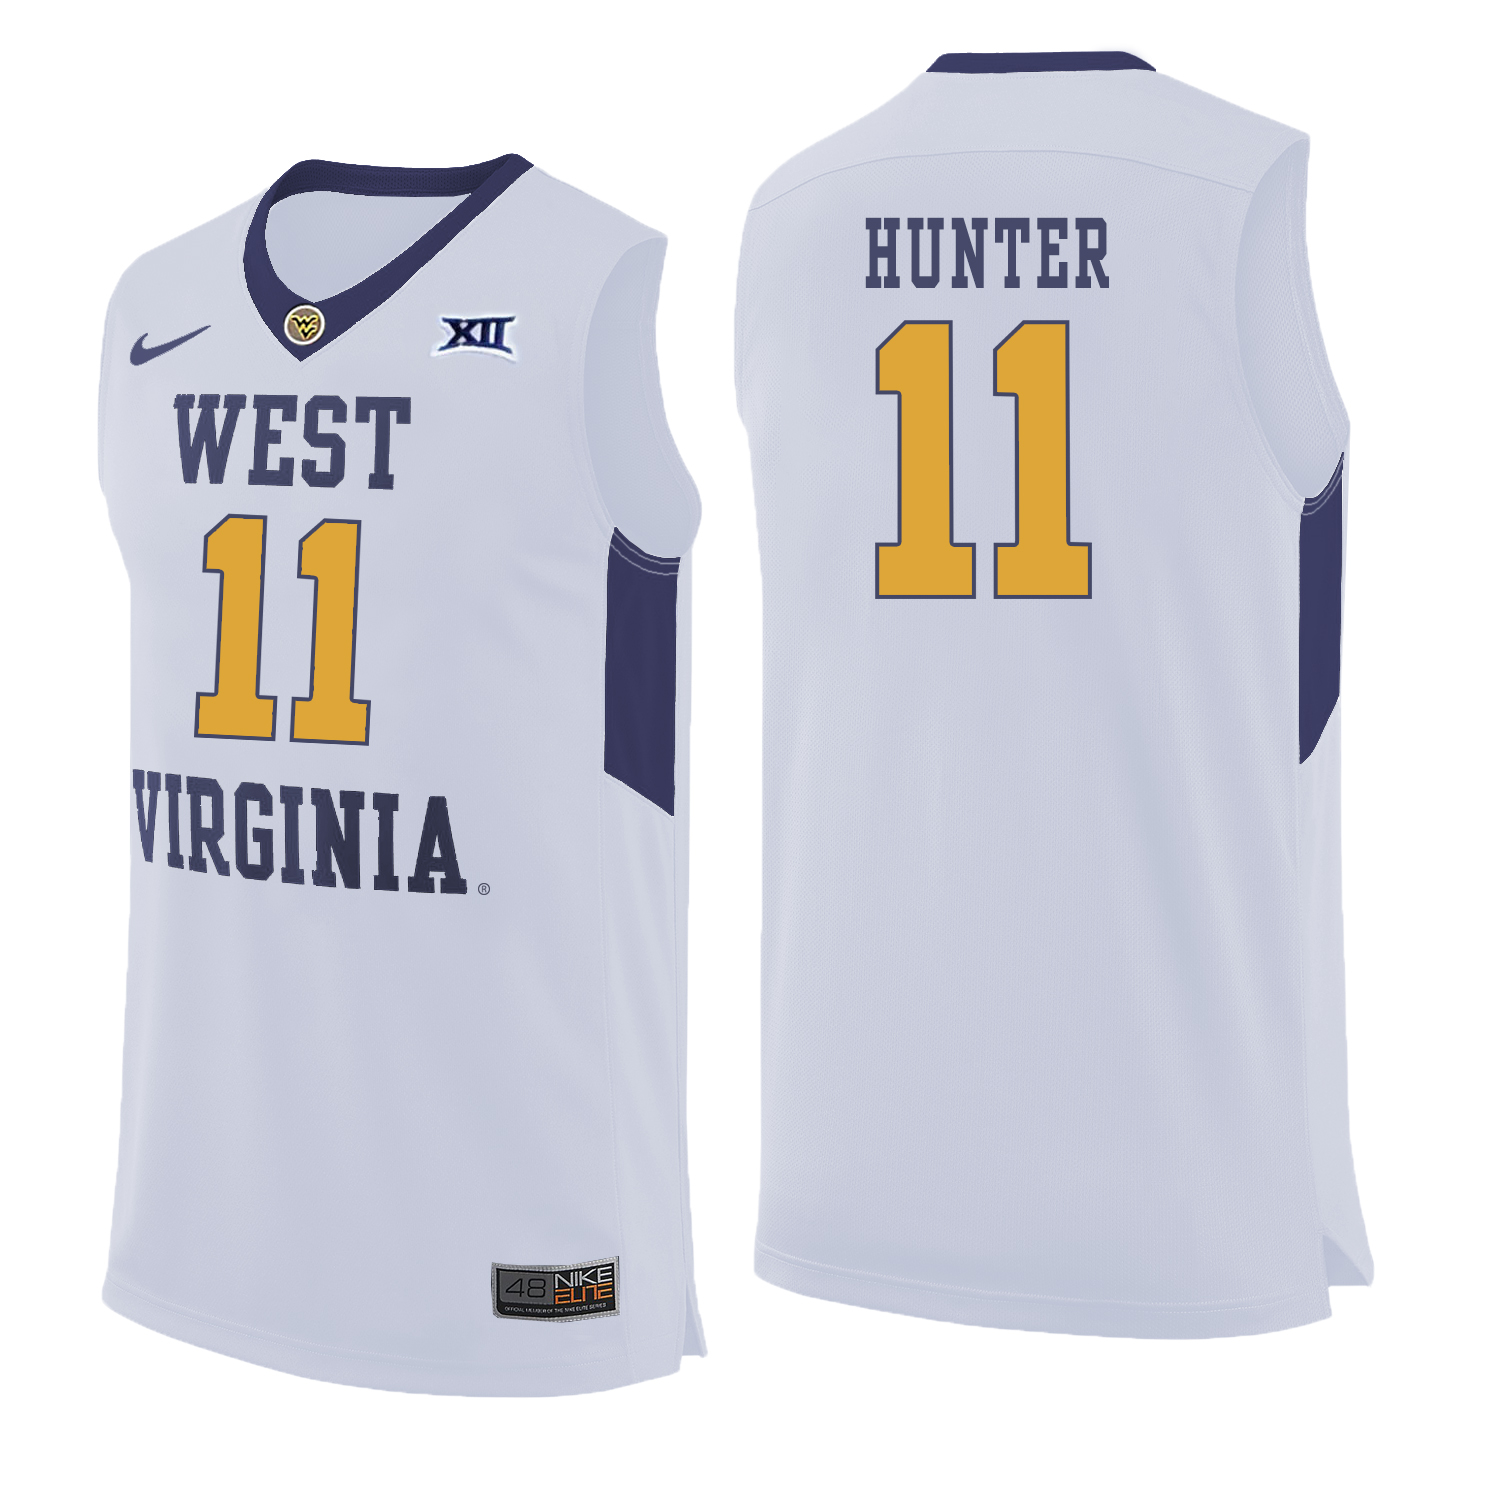 West Virginia Mountaineers 11 D'Angelo Hunter White College Basketball Jersey